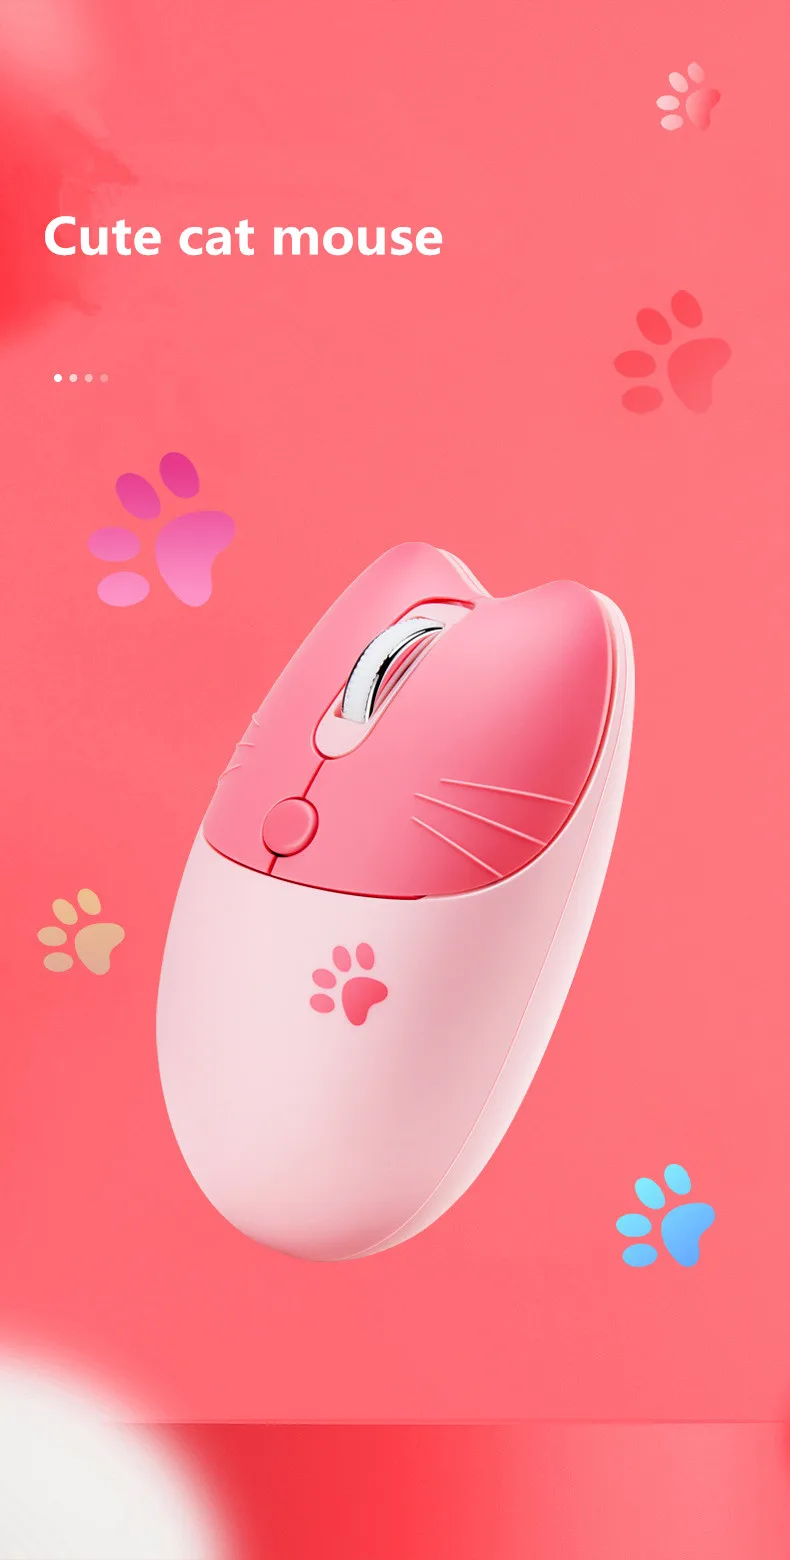 usb wireless mouse 2.4G Wireless Optical Mouse Cute Cat Cartoon Mute Computer Mice Ergonomic Mini 3D Office Mouse for Kid Girl Gift PC Laptop best office mouse